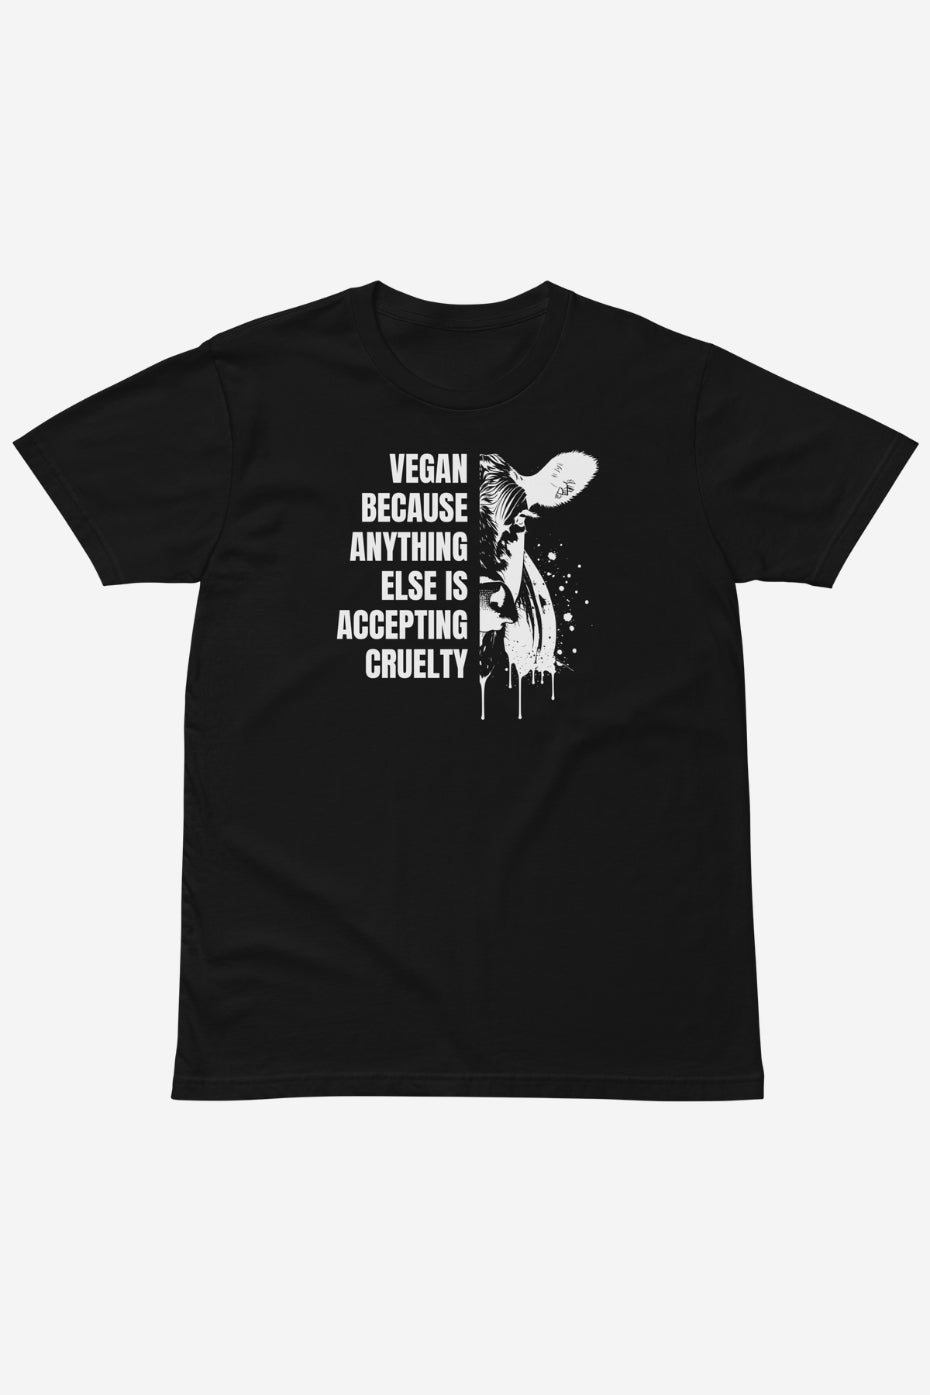 Anything Else is Cruelty Unisex T-Shirt